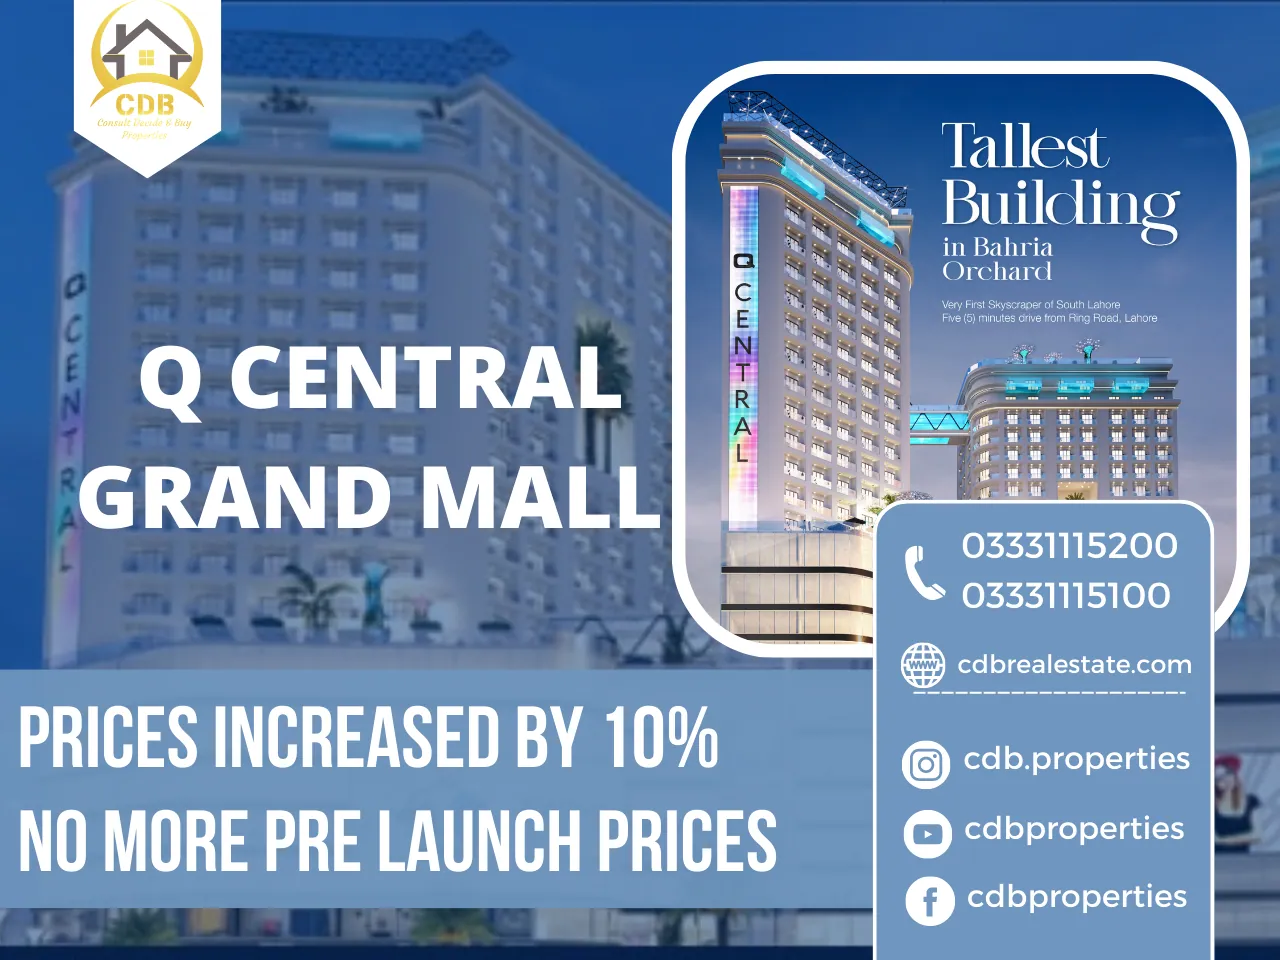 q central mall prices increased